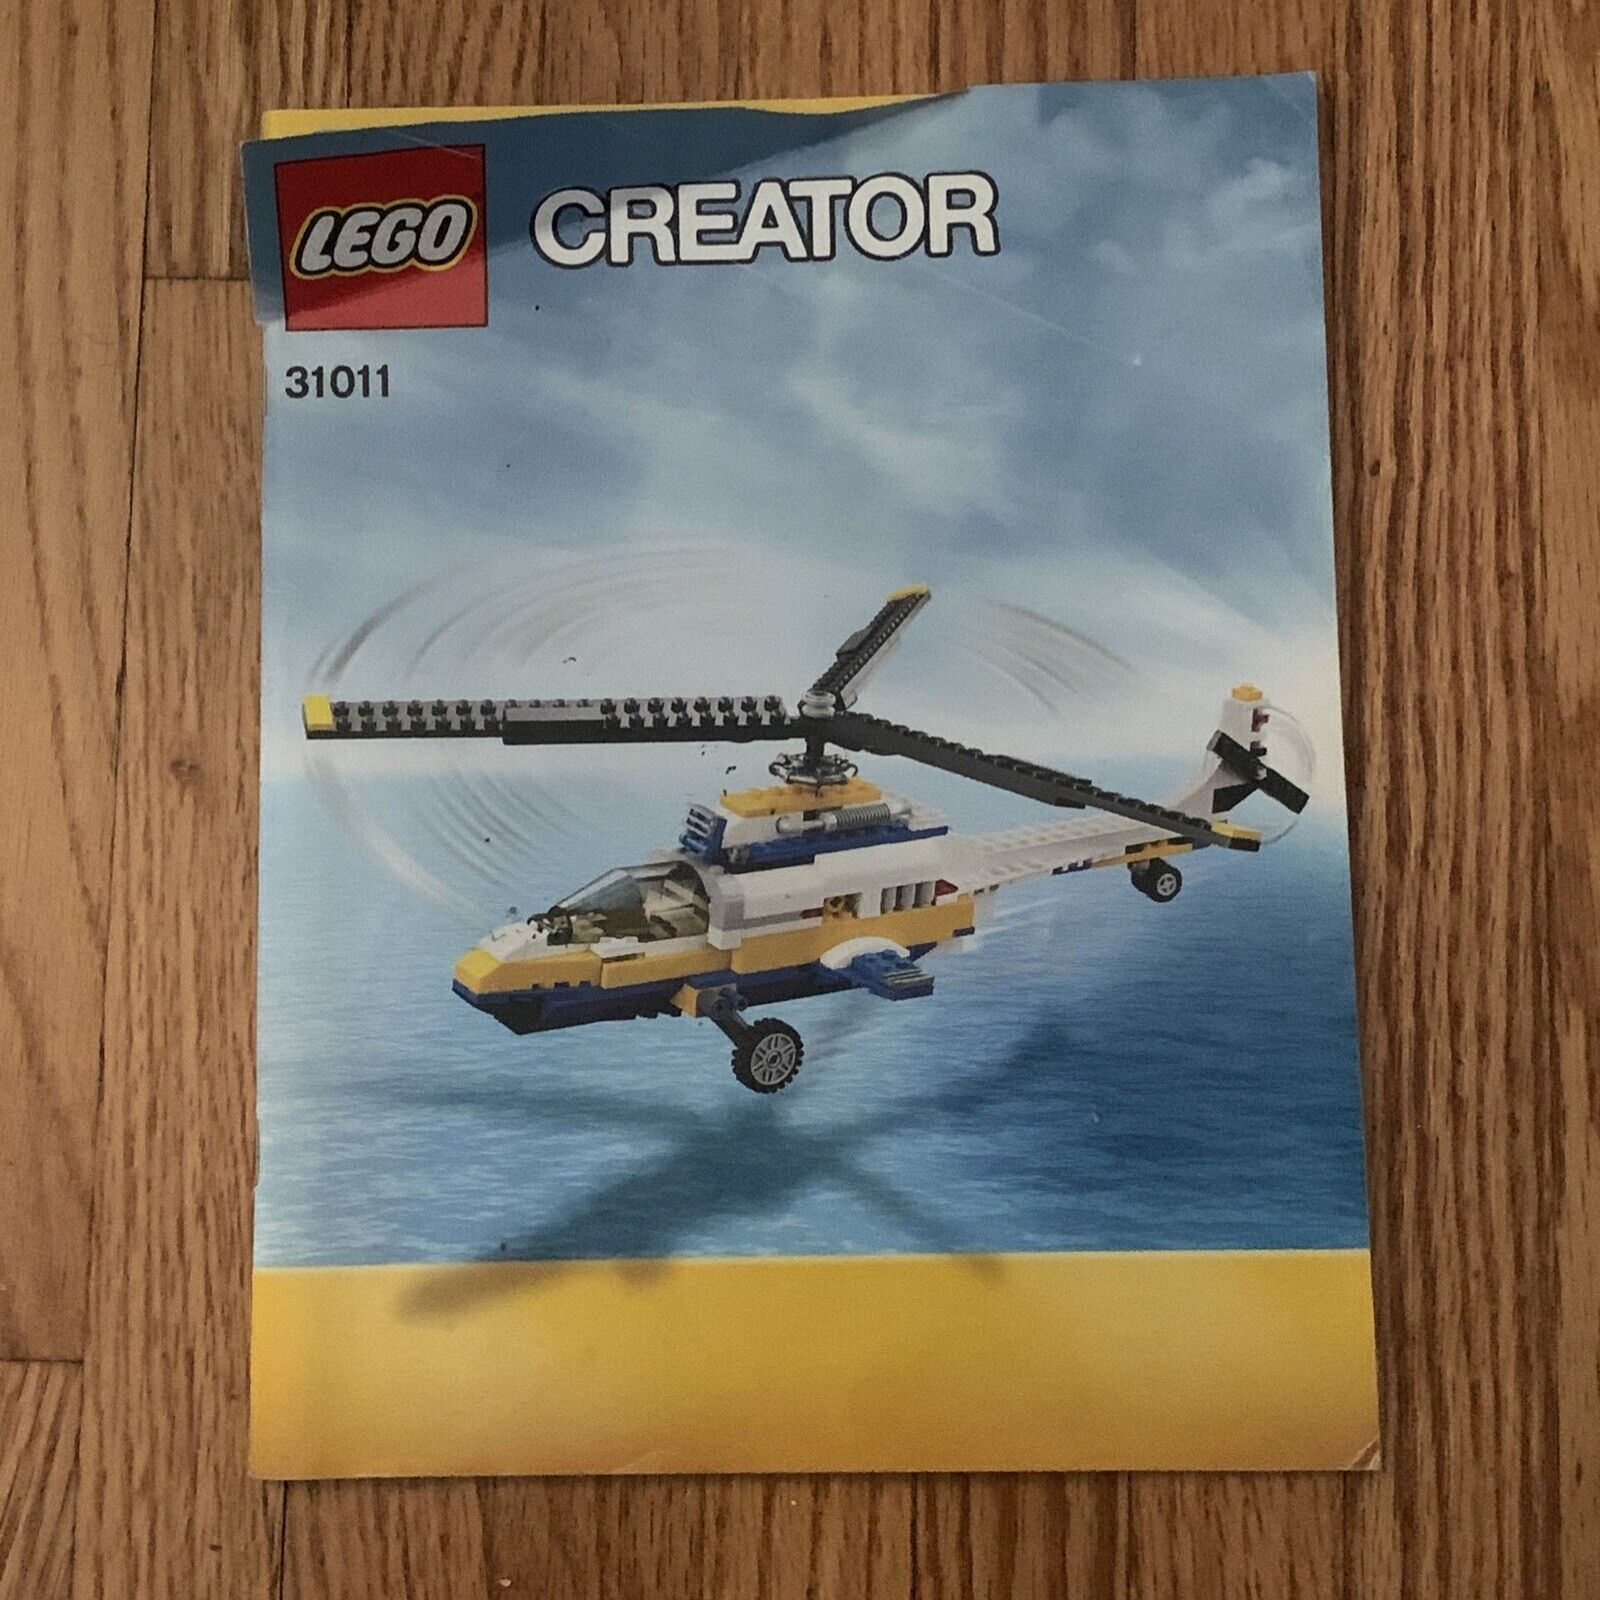 LEGO Creator 31011 Manual Replacement Guide Instruction Booklet ONLY